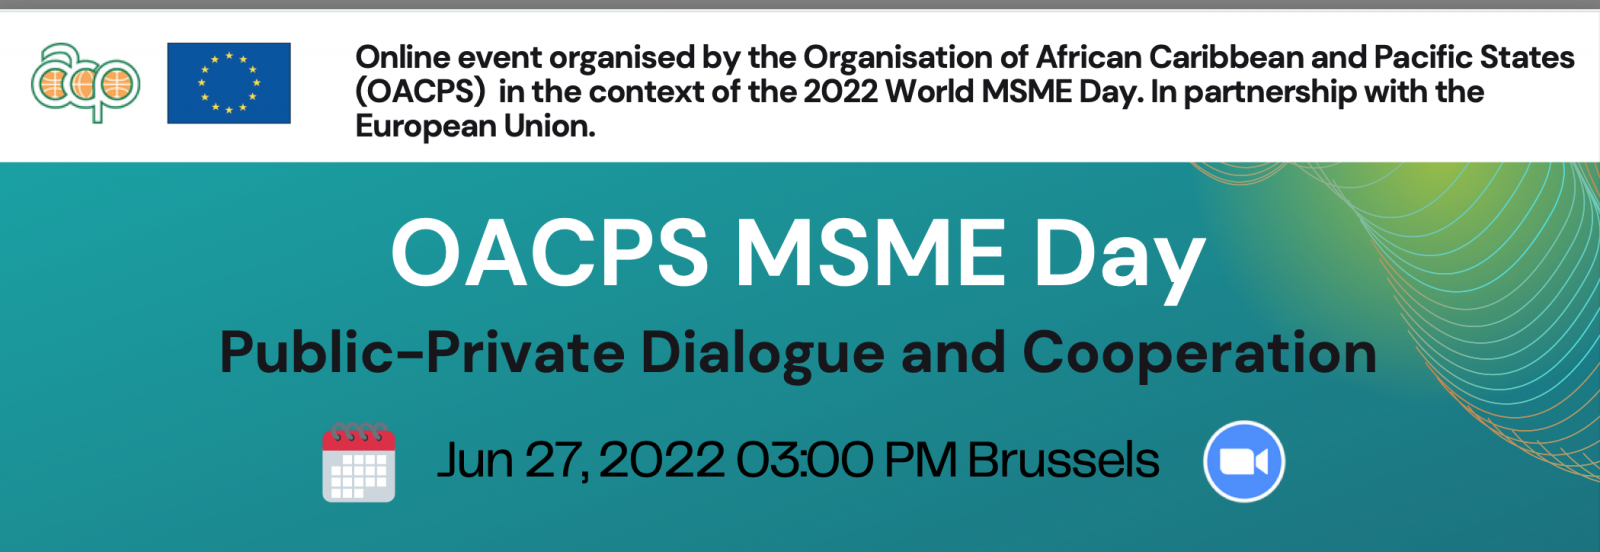 OACPS Celebrates MSME Day With Online Debate on Public-Private Dialogue and Cooperation